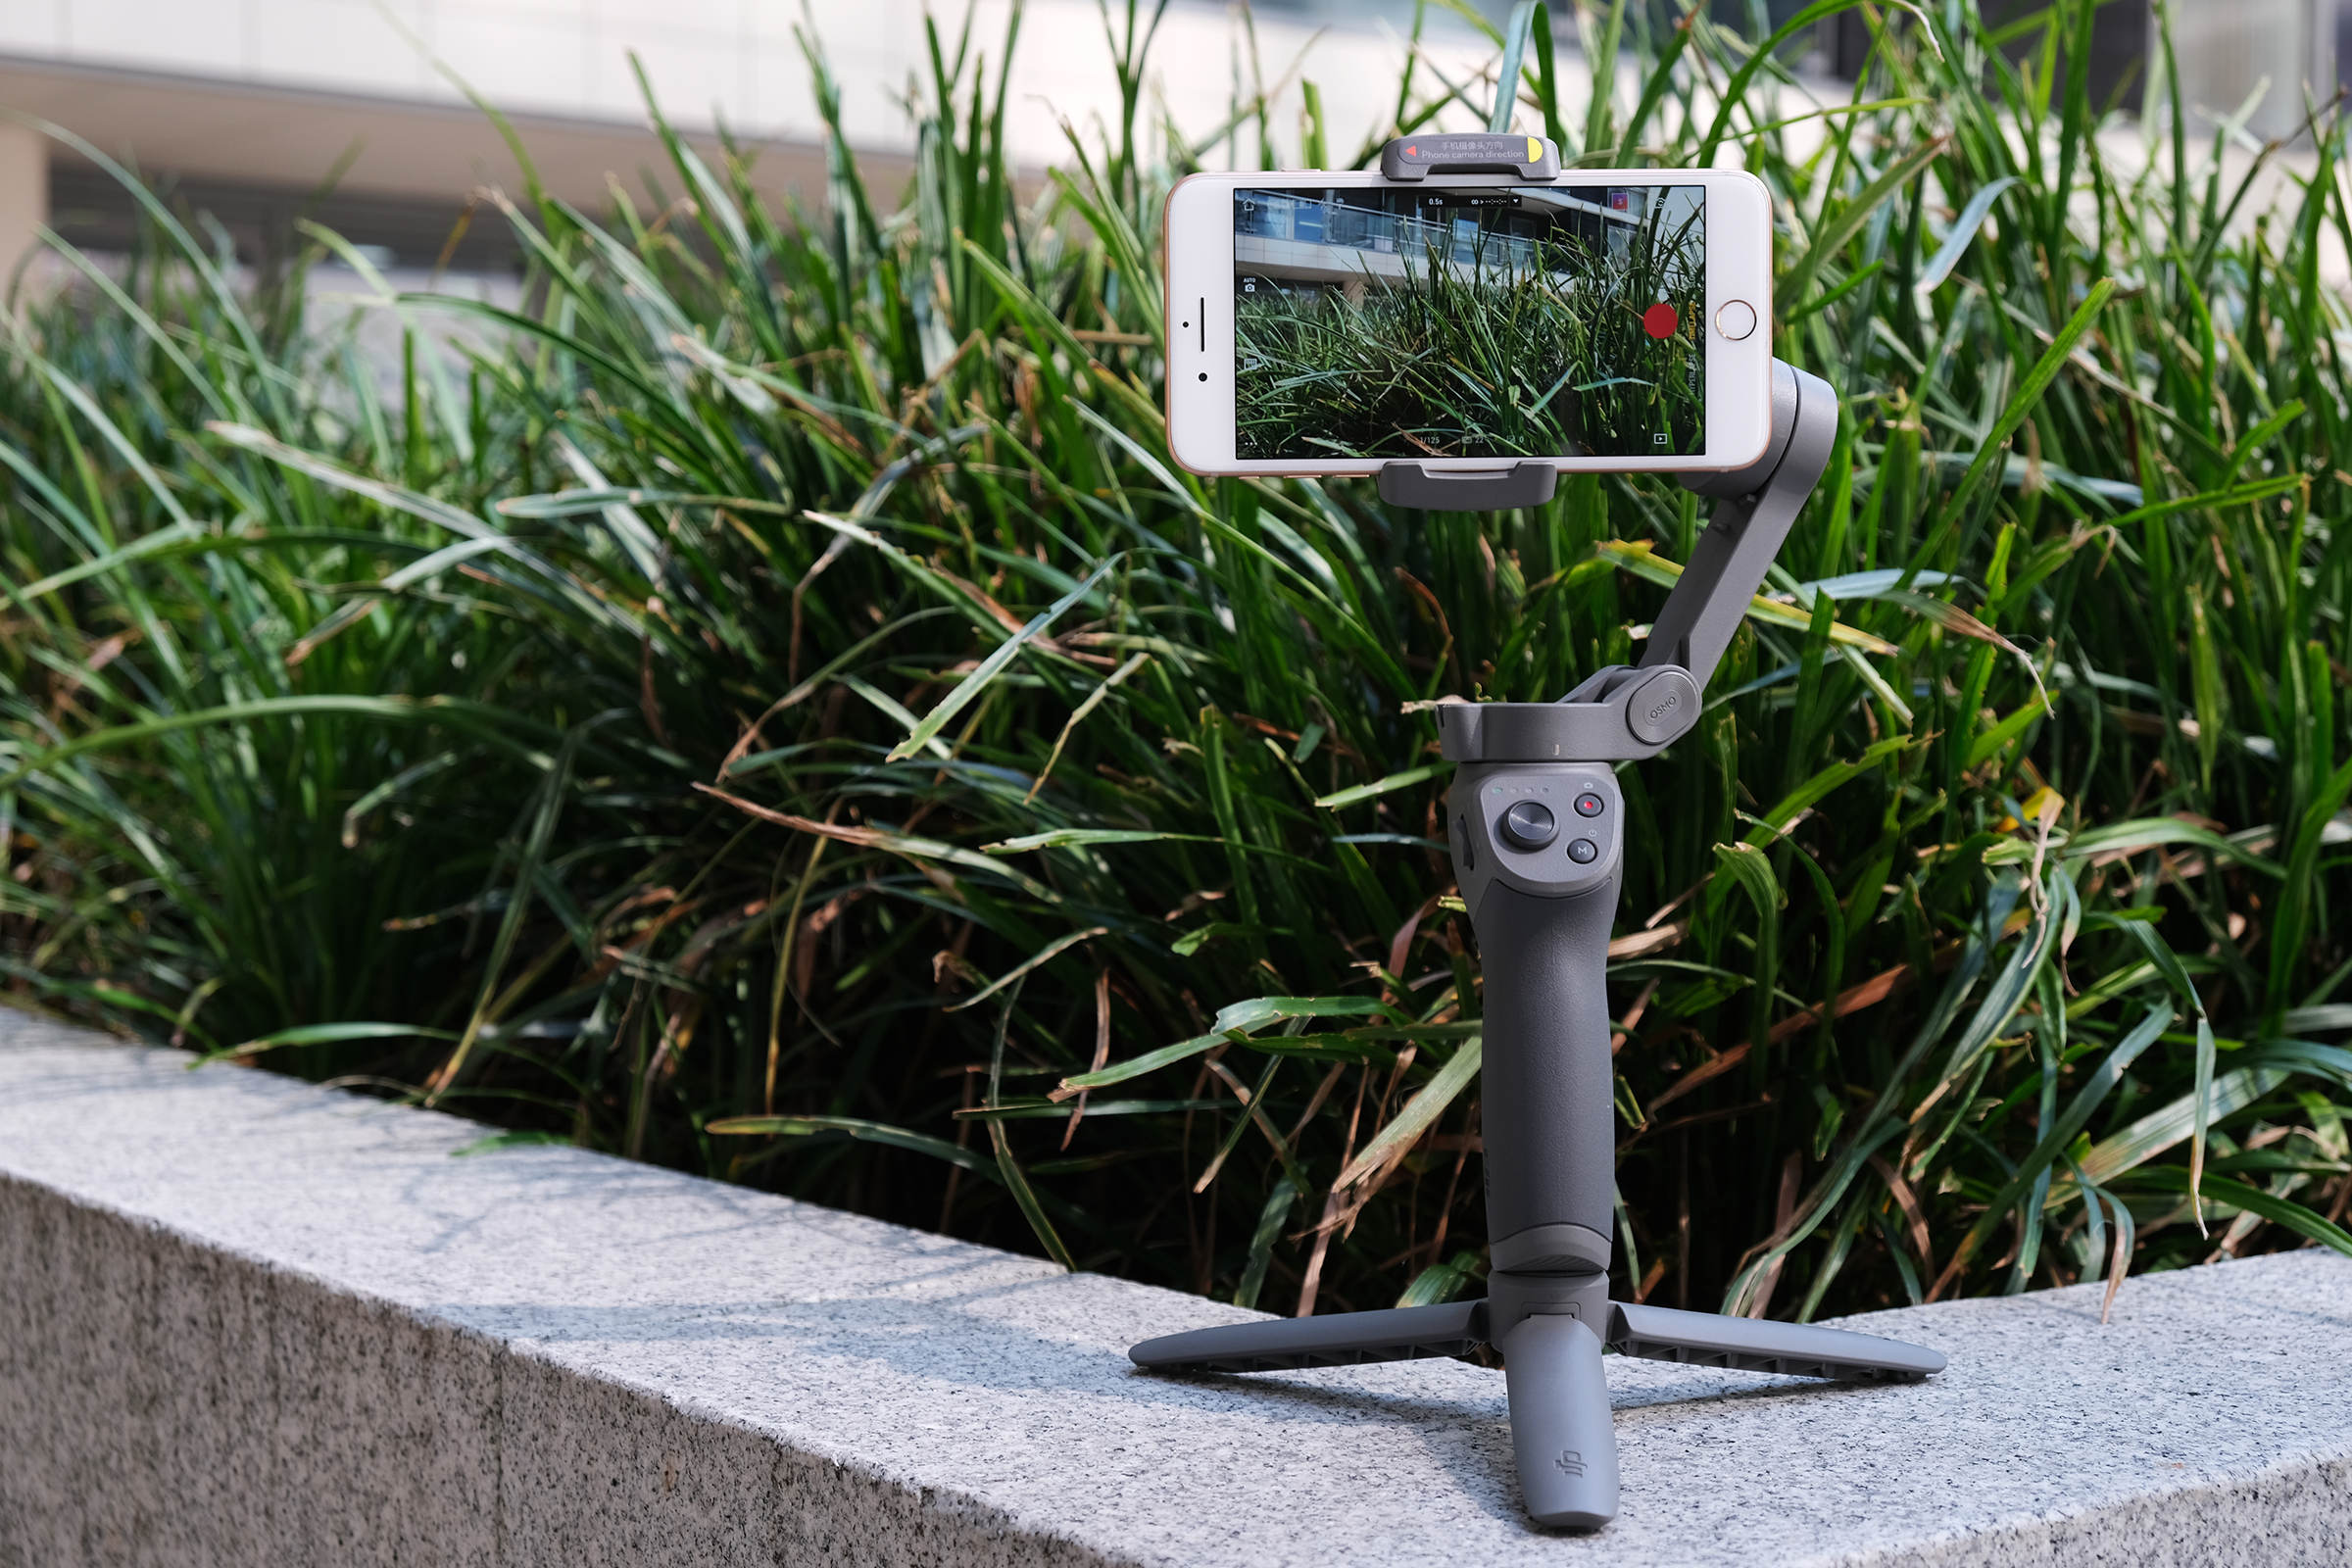 DJI Osmo Mobile 3 Review | Trusted Reviews